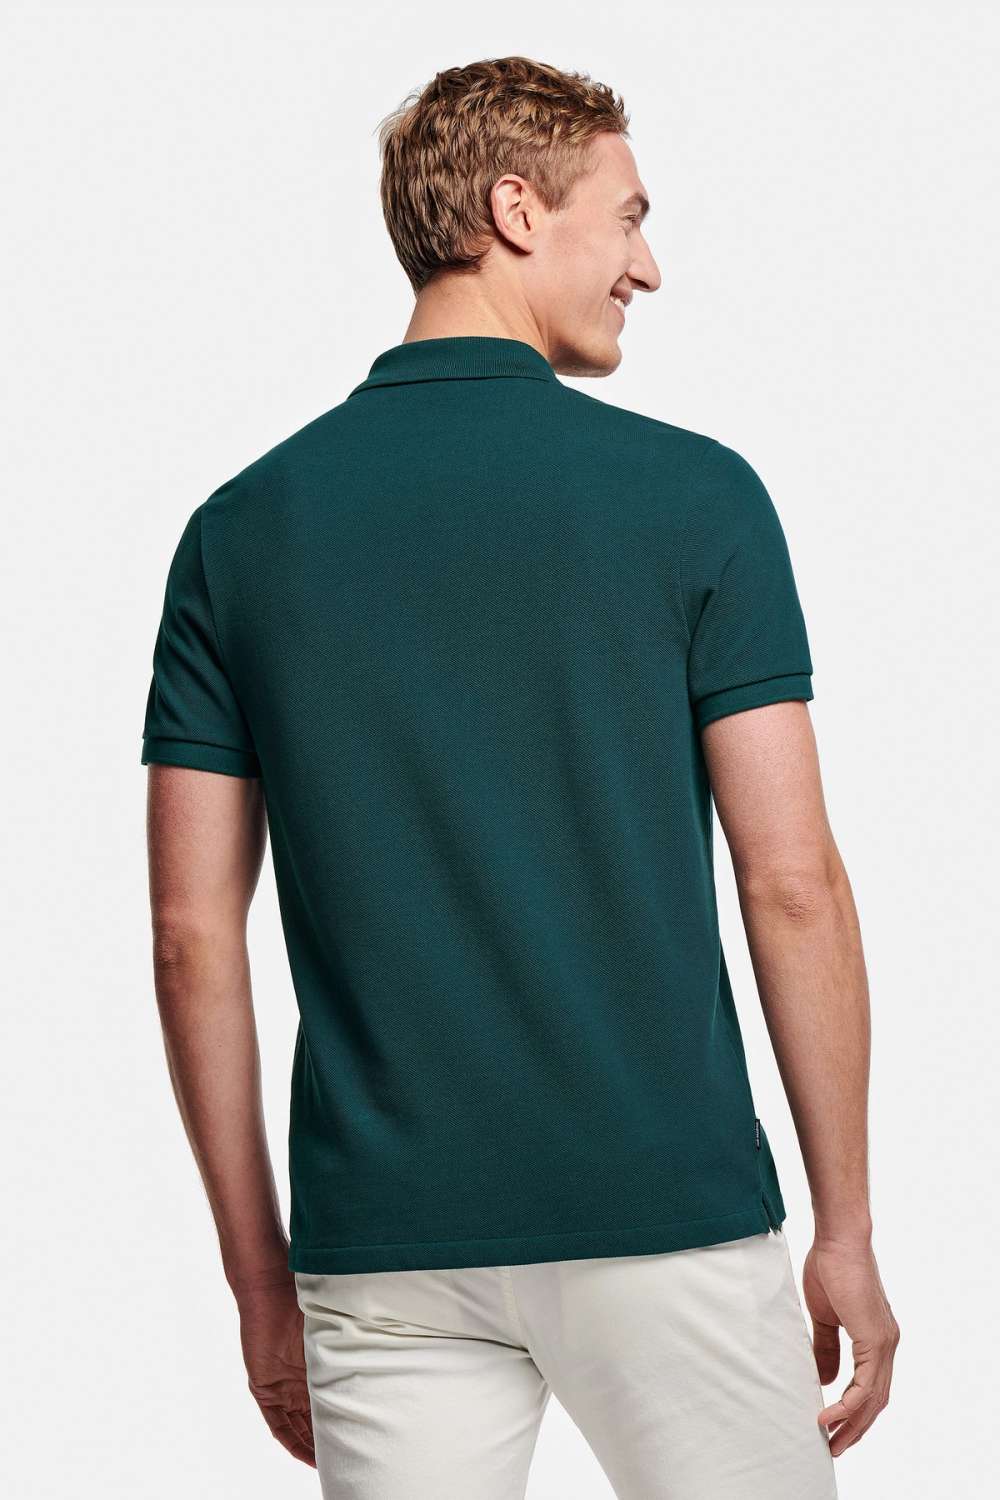 Goodwoods * The Classic Polo